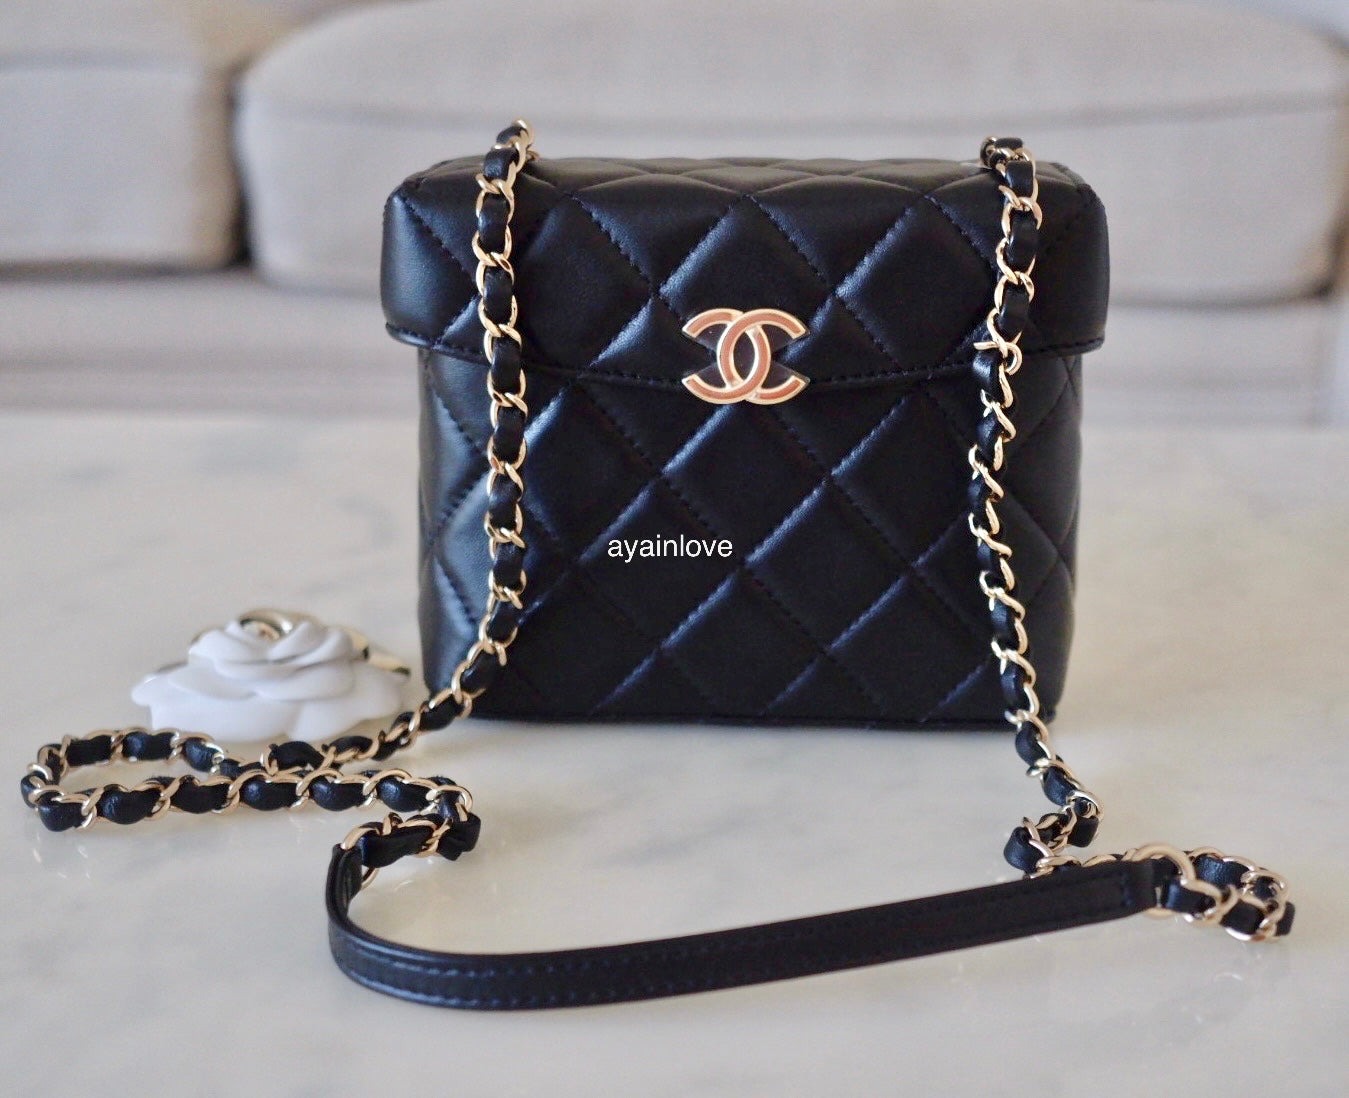 Trendy cc top handle leather handbag Chanel Black in Leather - 36181566